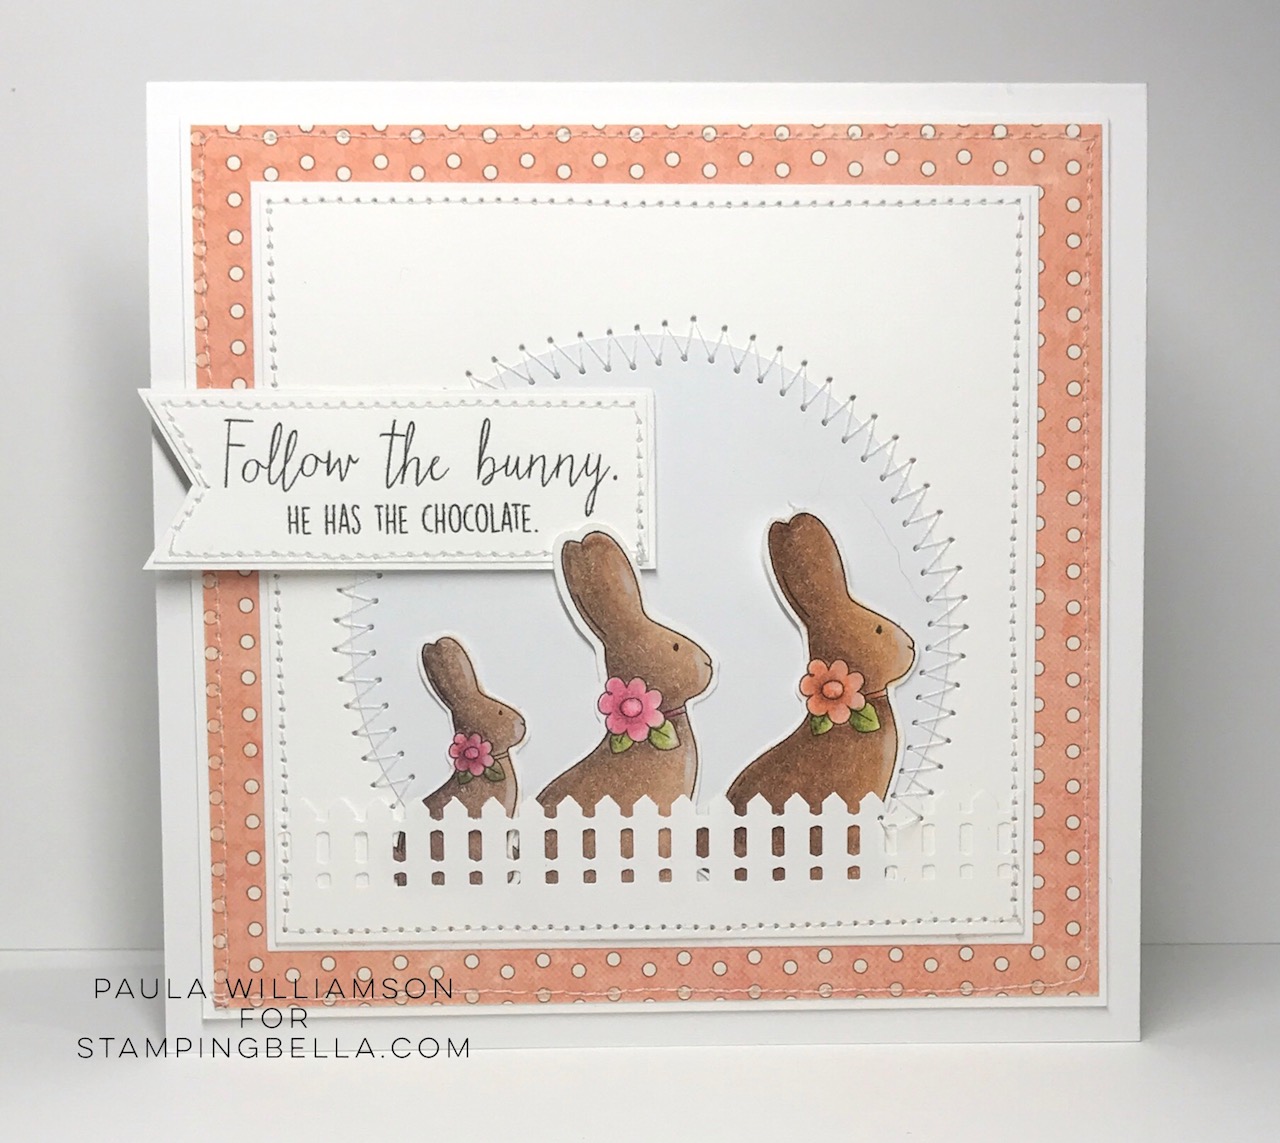 www.stampingbella.com : RUBBER STAMP USED:  CHOCOLATE BUNNIES card by Paula Williamson